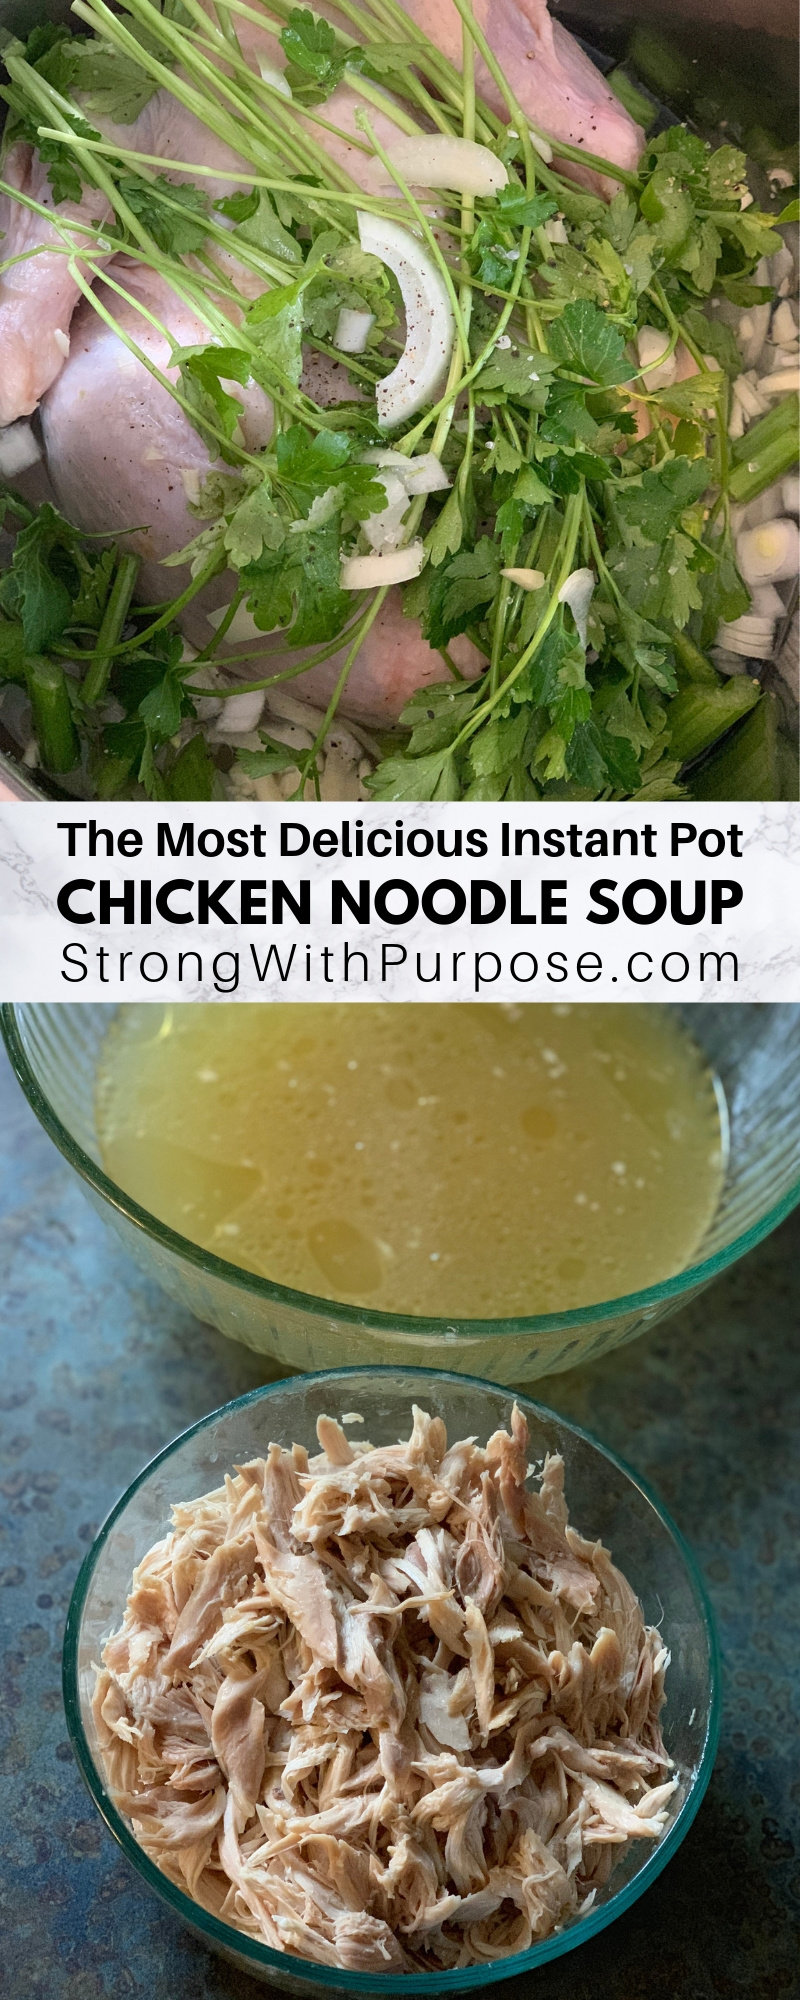 The Most Delicious Instant Pot Chicken Noodle Soup - Recipe by Strong with Purpose